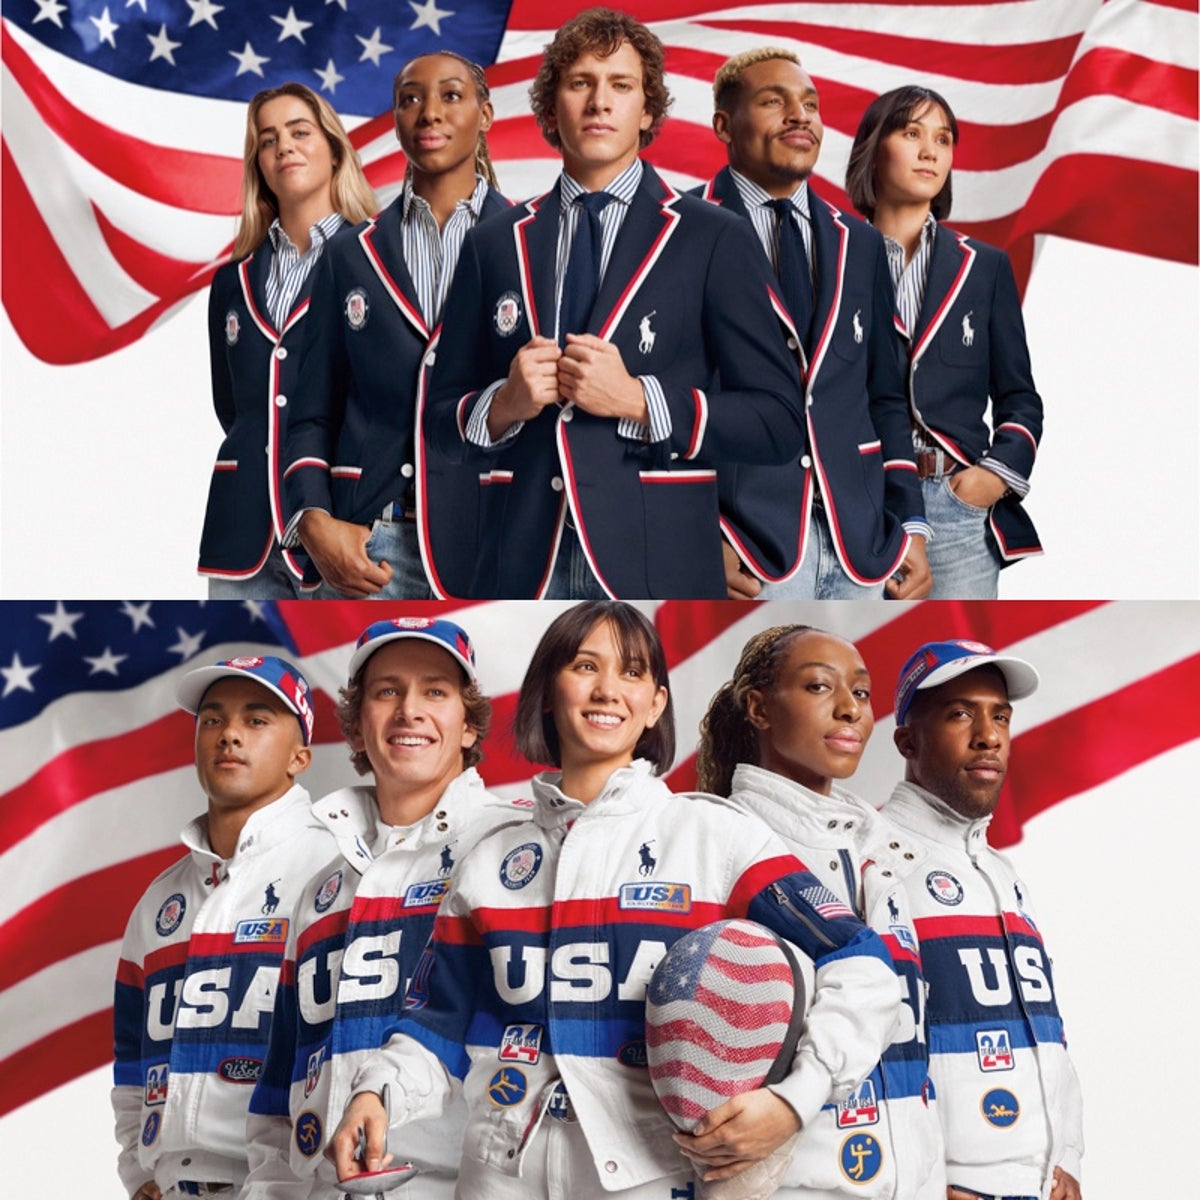 Ralph Lauren unveils Team USA’s Olympic uniforms - but critics say they’re more fitting for Nascar 